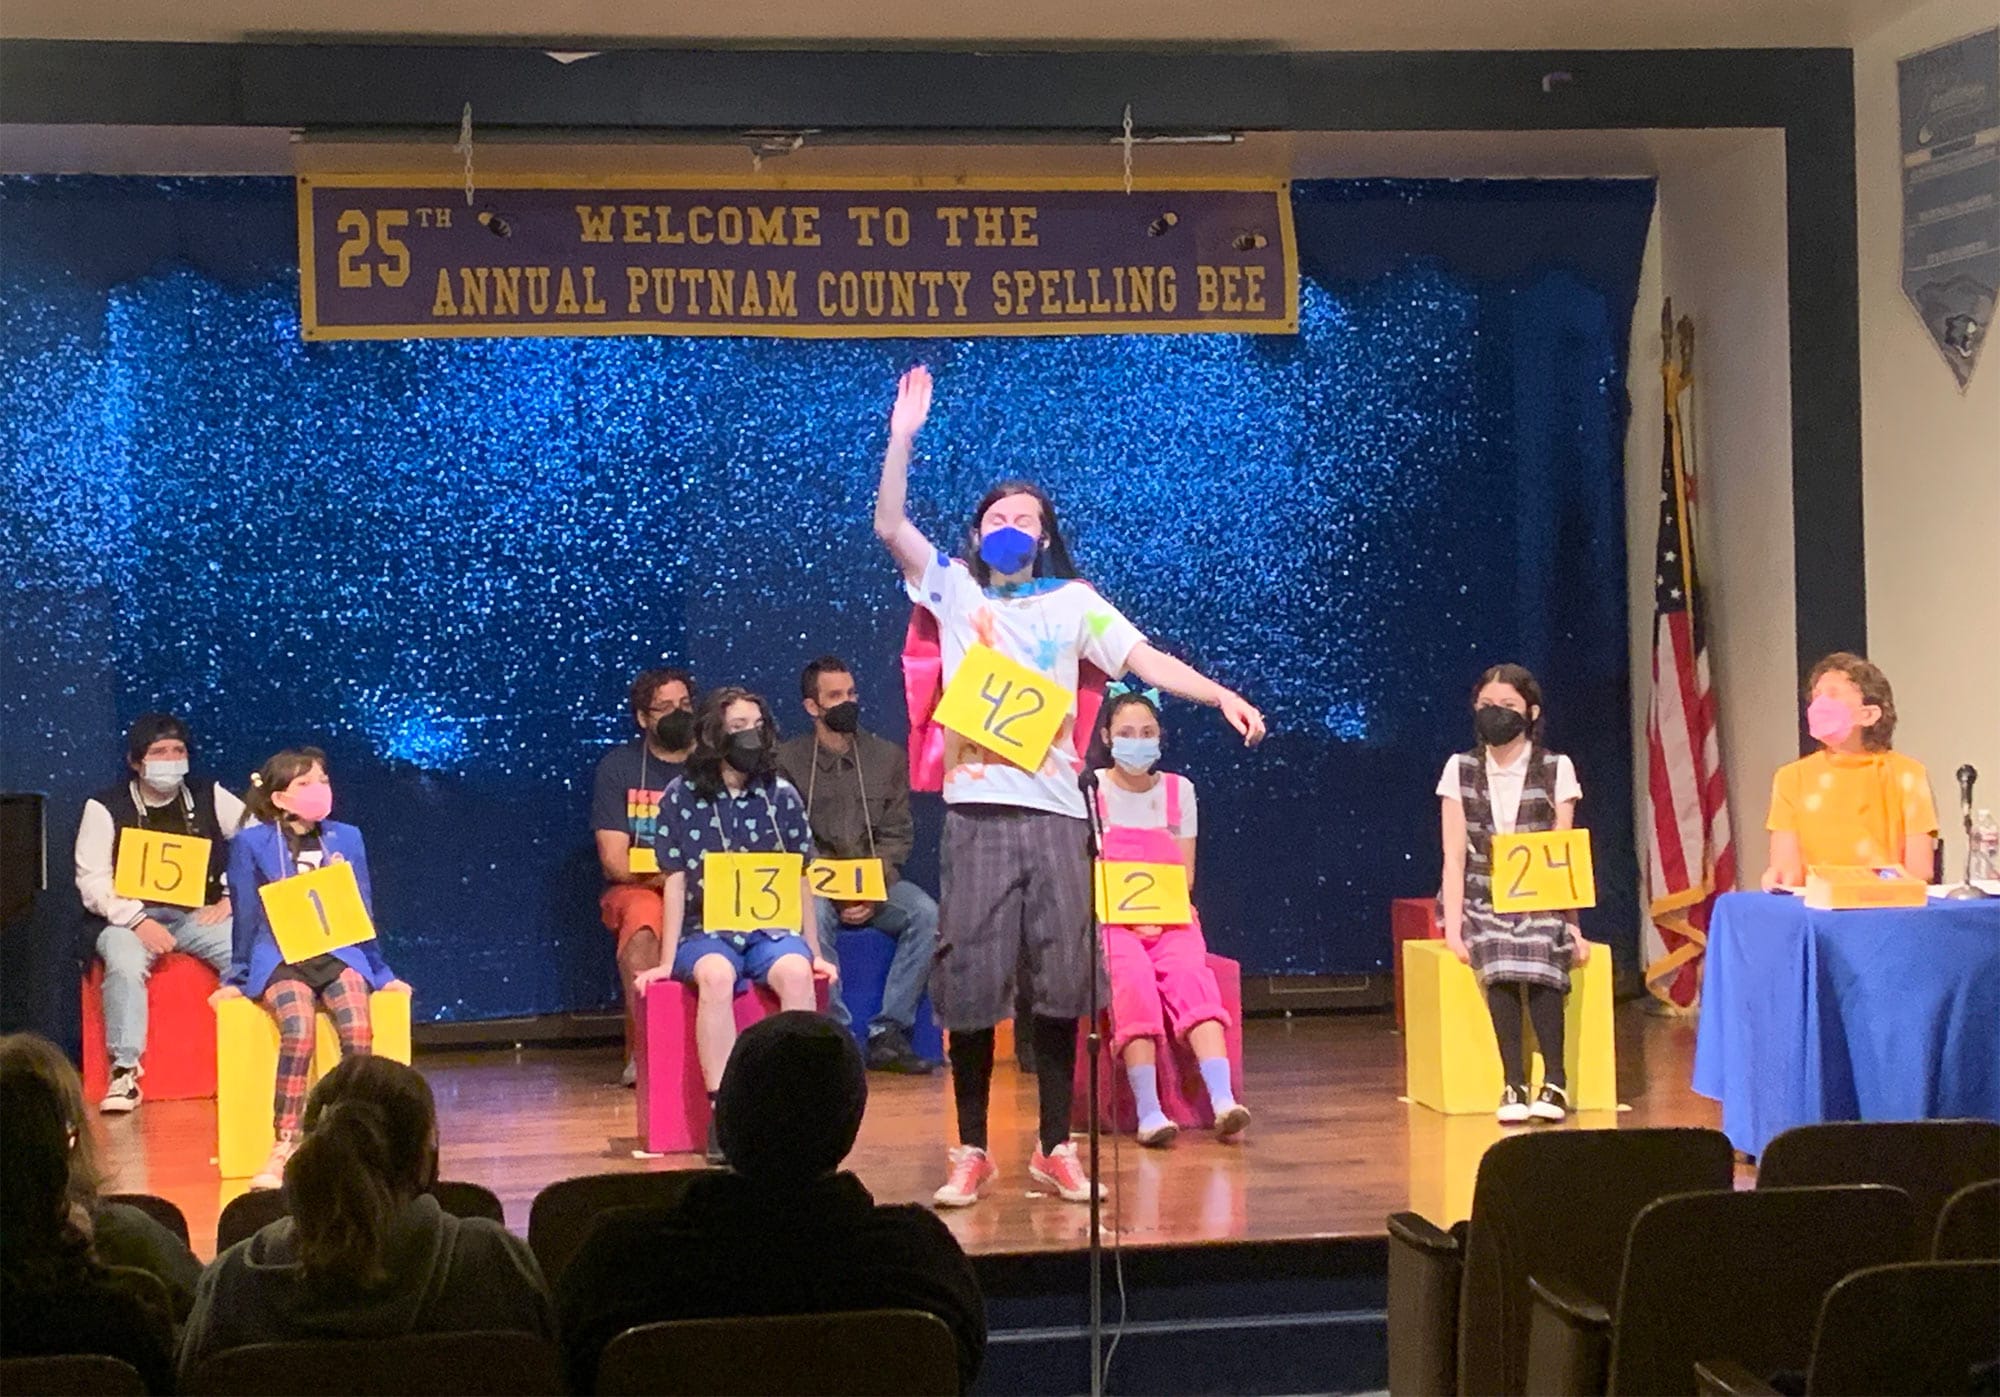 A performance of the musical "The 25th Annual Putnam County Spelling Bee"